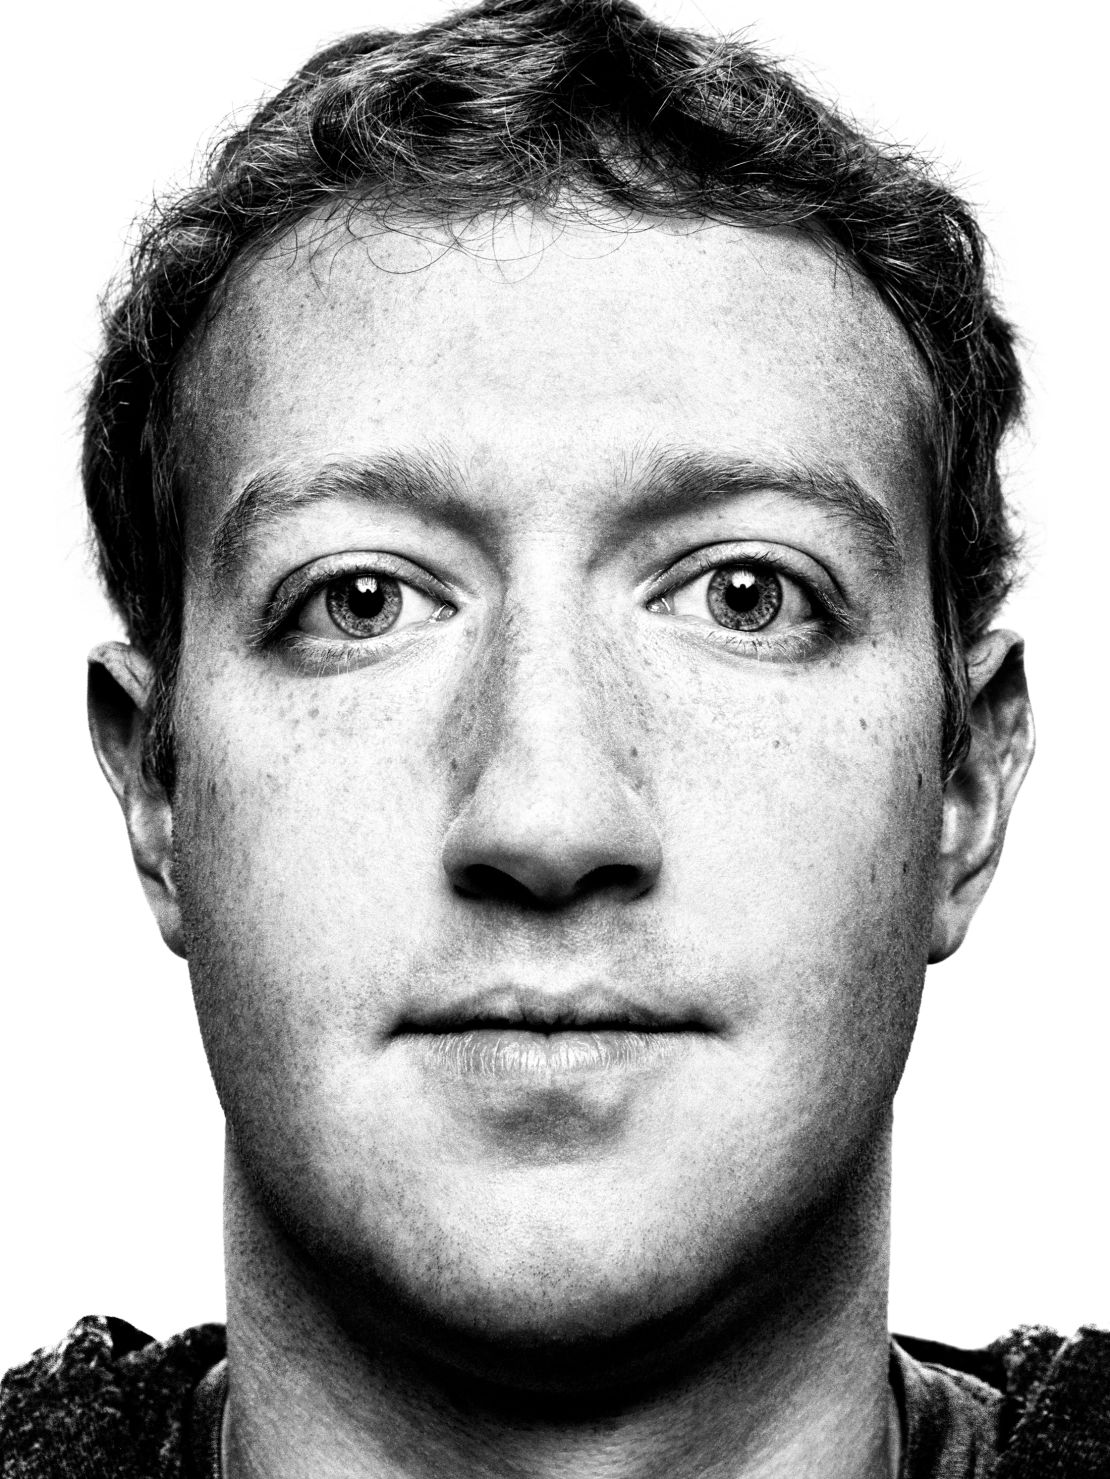 Platon has revisited his older images of celebrities in order to isolate their eyes in each portrait. (Pictured: Mark Zuckerberg)